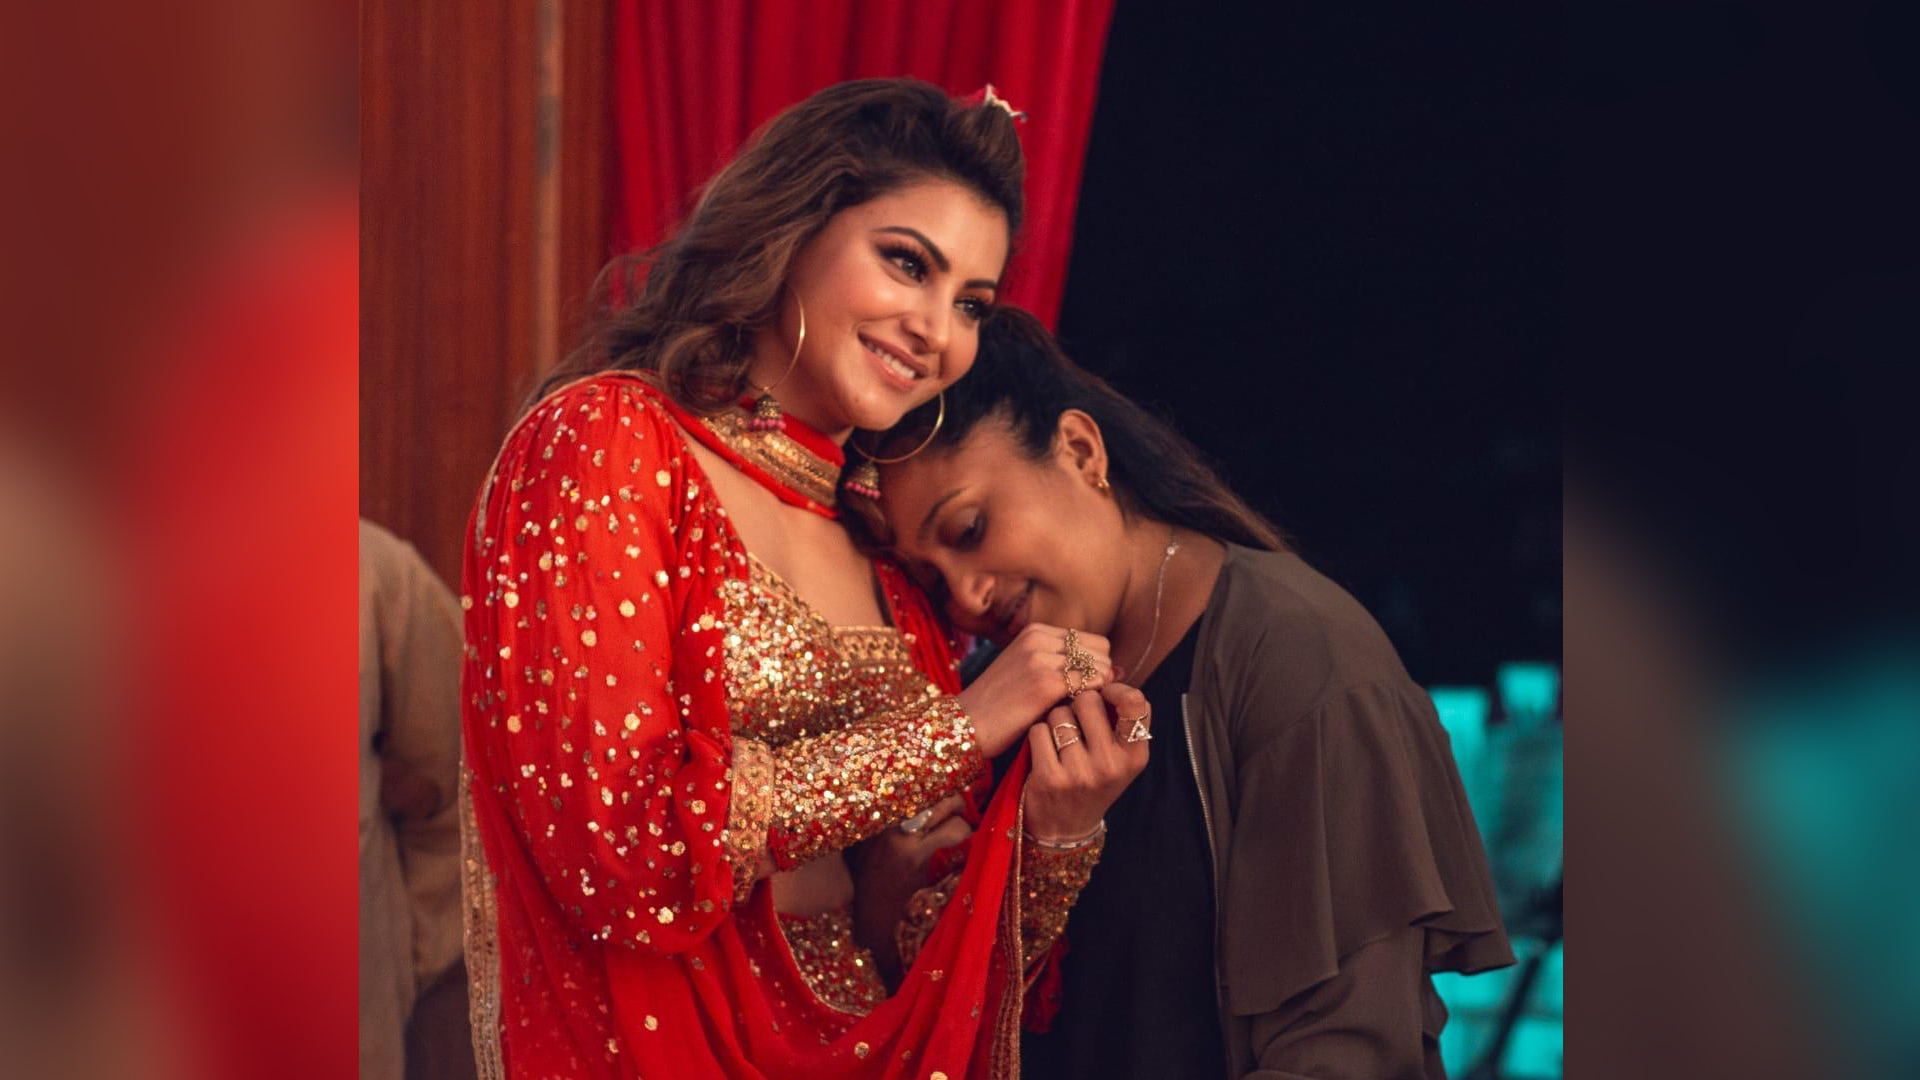 Urvashi Rautela and Shabina Khan’s superhit duo is all set to sizzle yet again in Meet Bros upcoming song ‘My Channa Ve’.